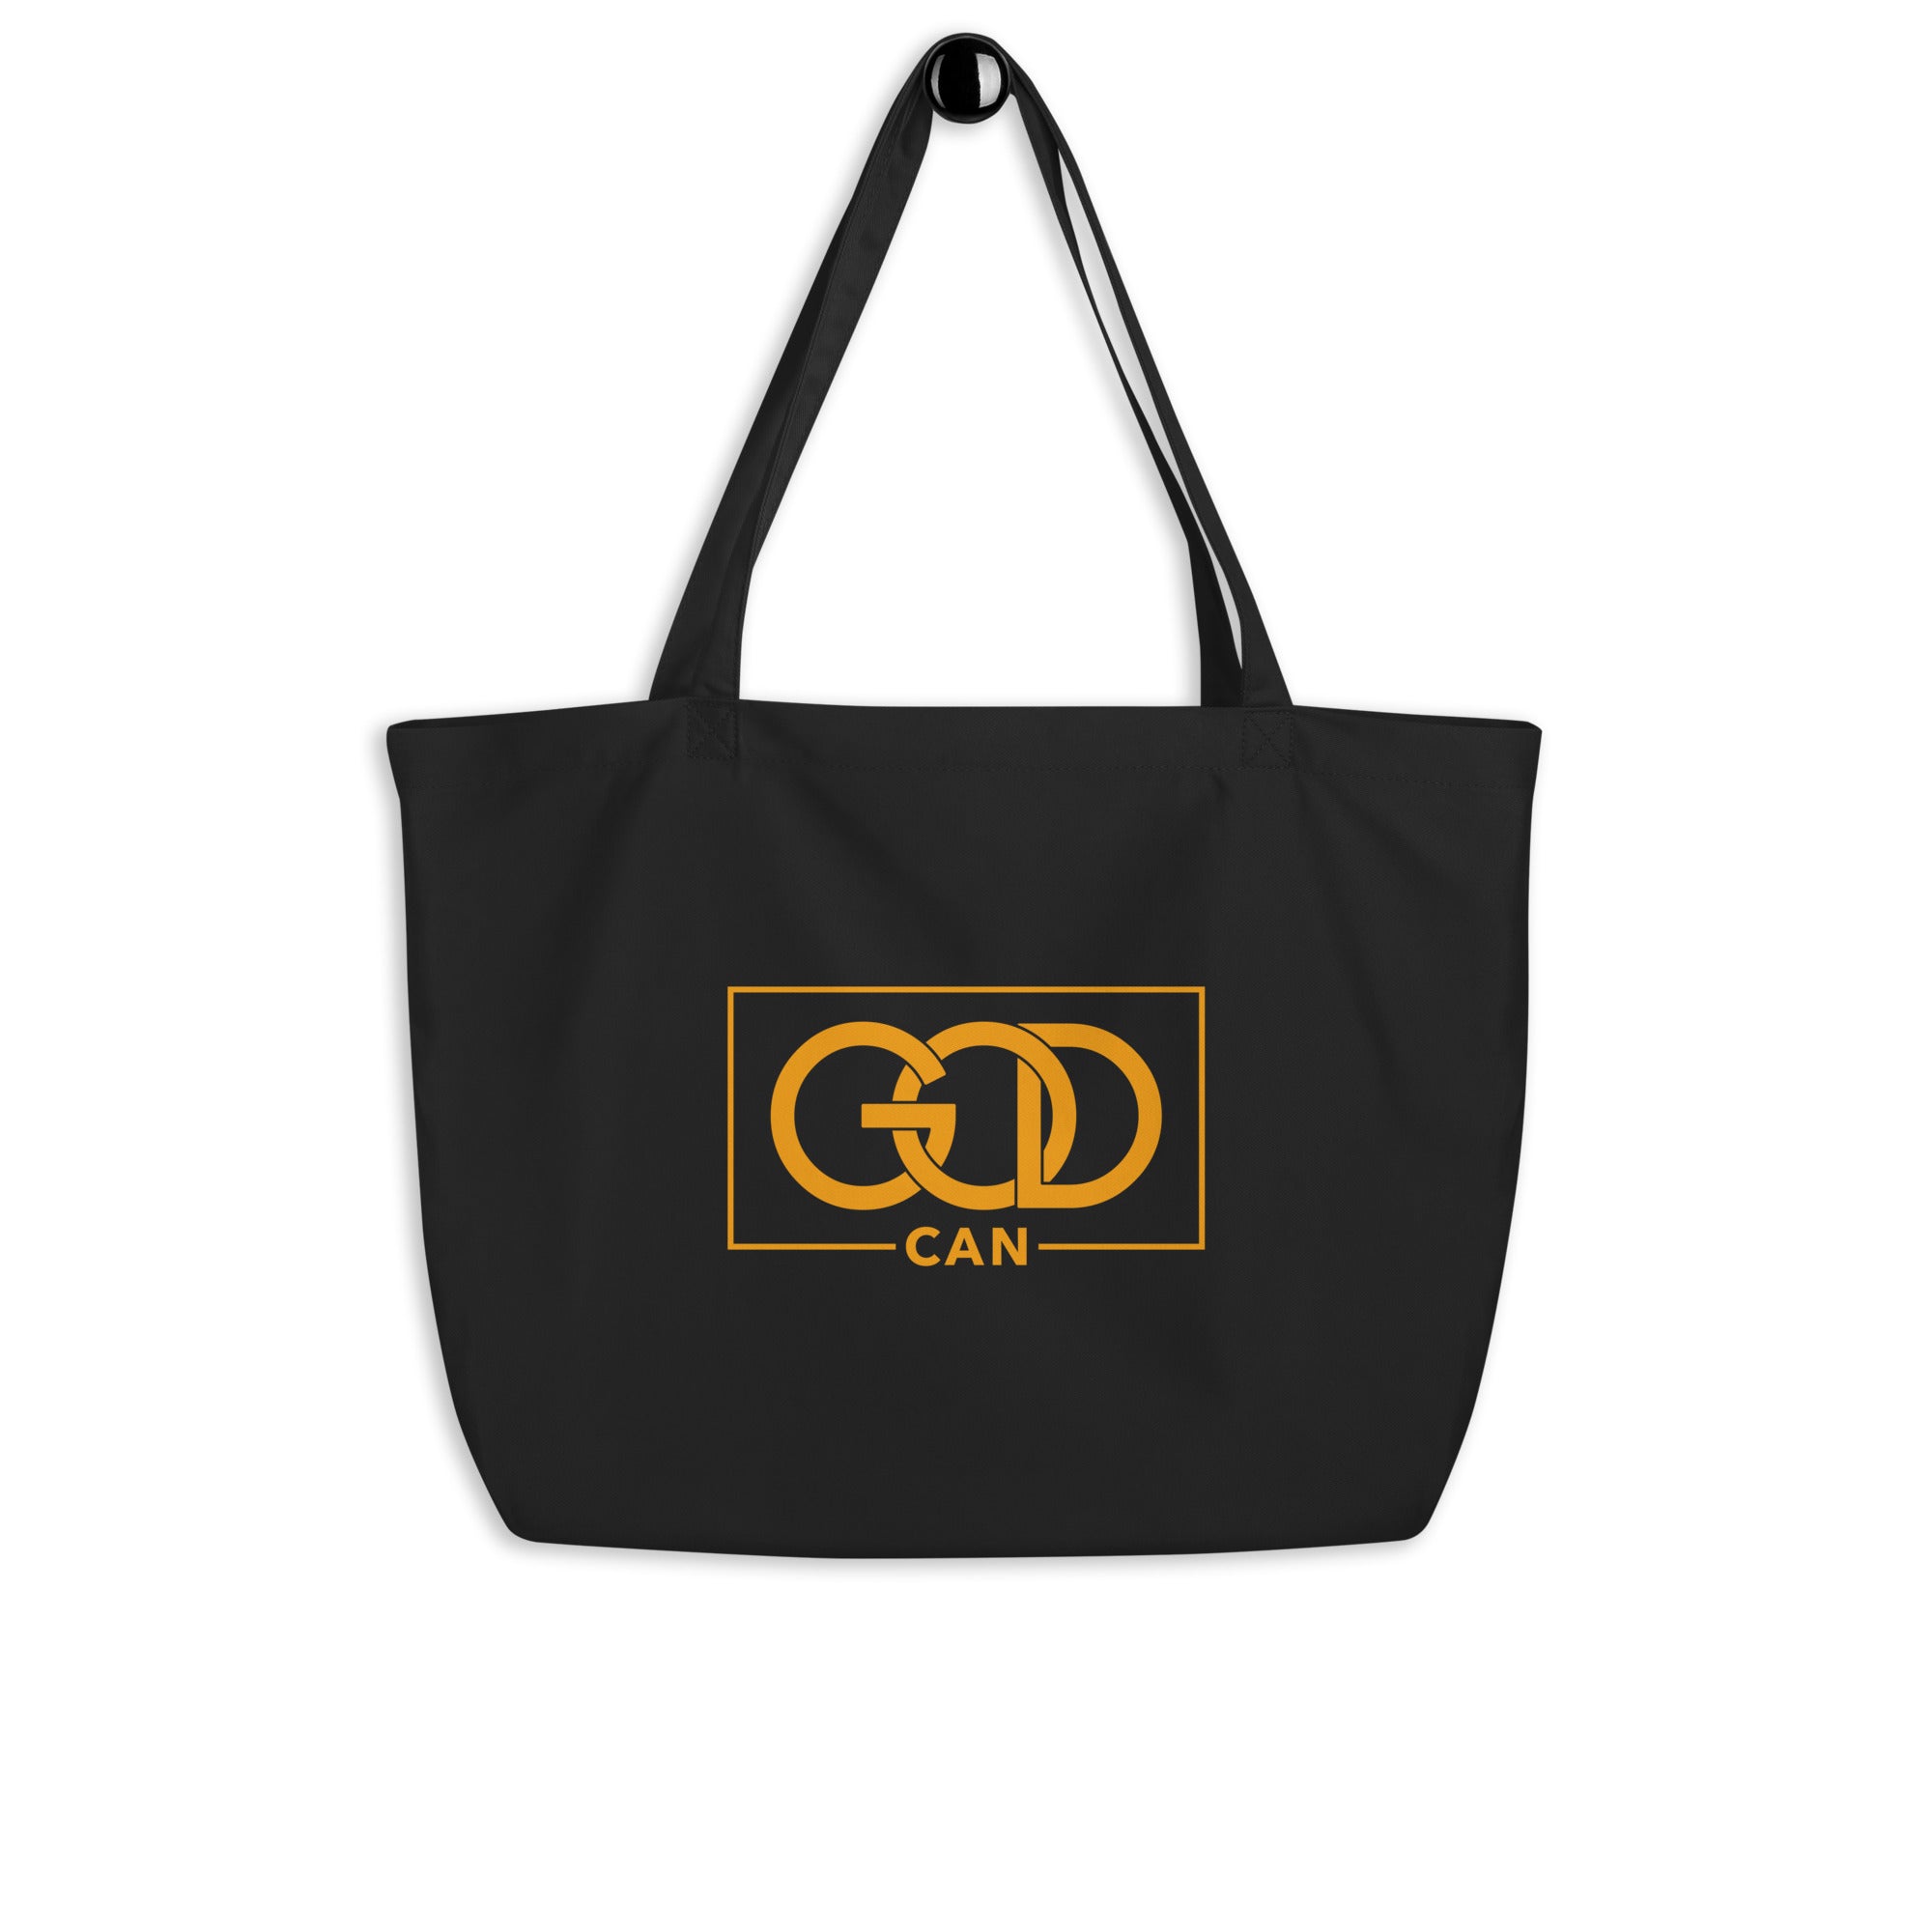 Organic Tote bag with a positive affirmation message that inspires your spirit. The perfect christian merch gift idea.